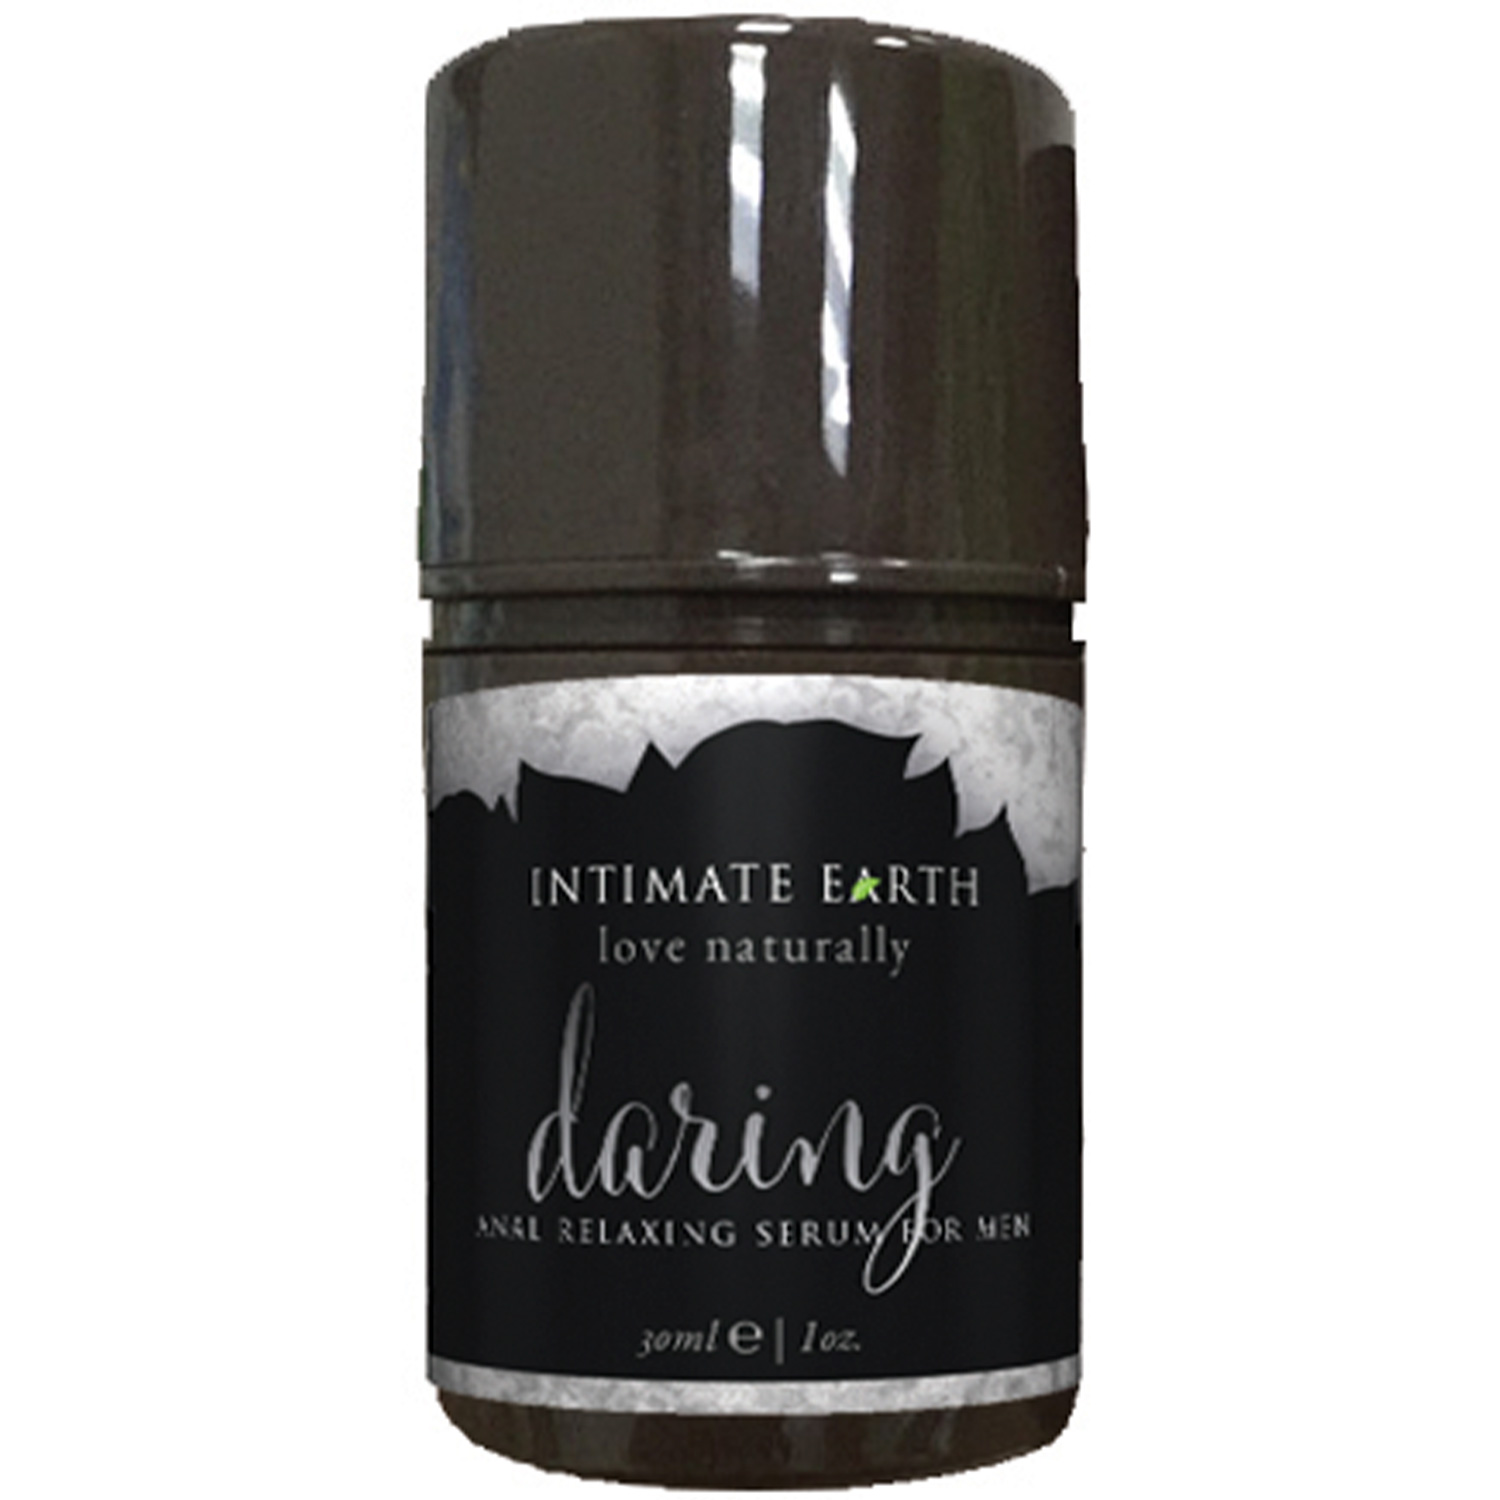 Intimate Earth Daring Anal Relaxing Serum Mand 30 ml - Clear thumbnail